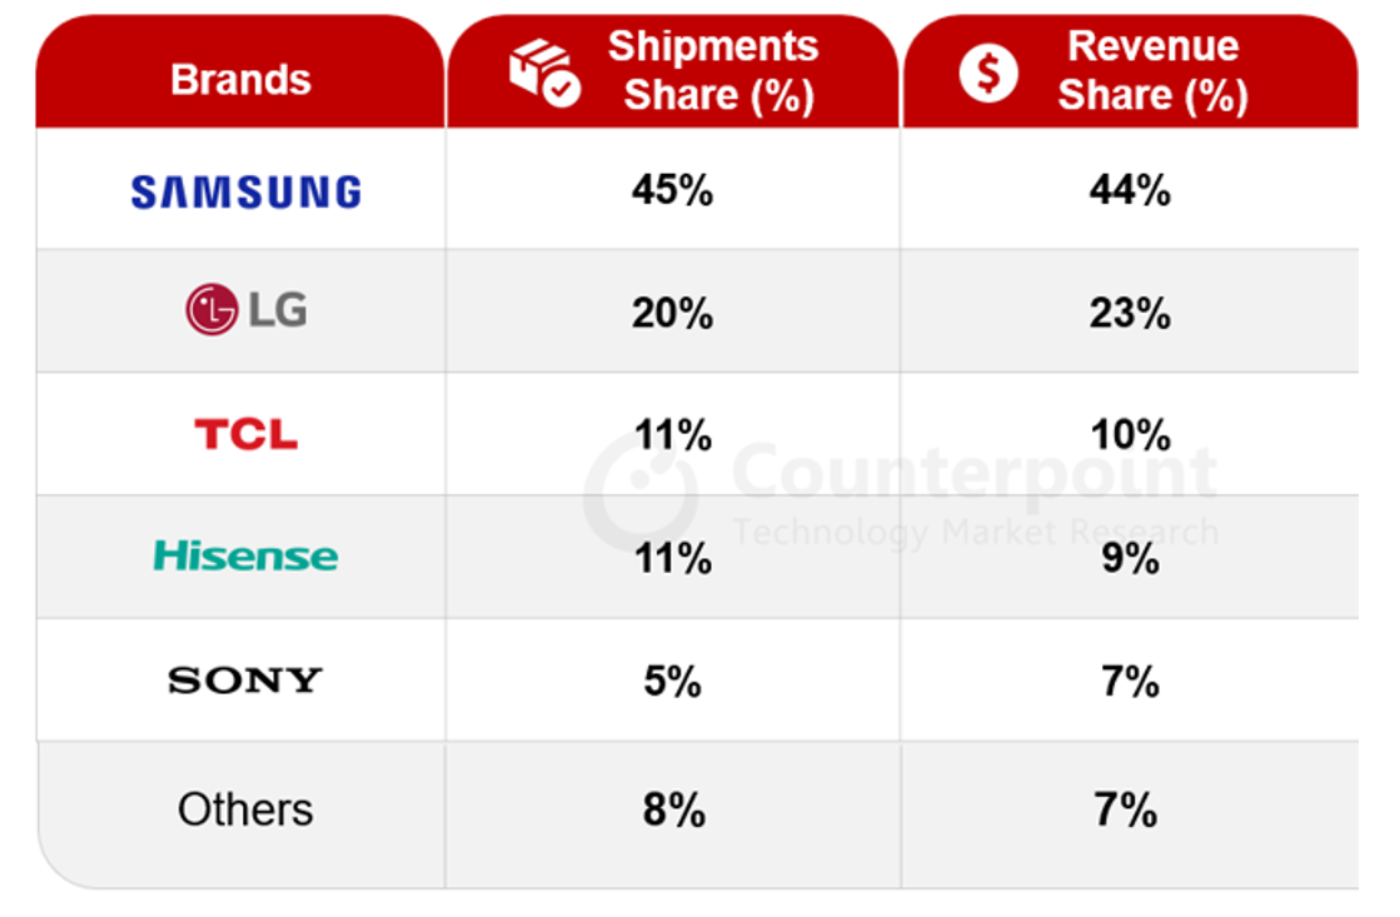 Global Premium TV Shipment and Revenue Share - Samsung, LG Electronics, TCL, Hisense, Sony Corp., Others